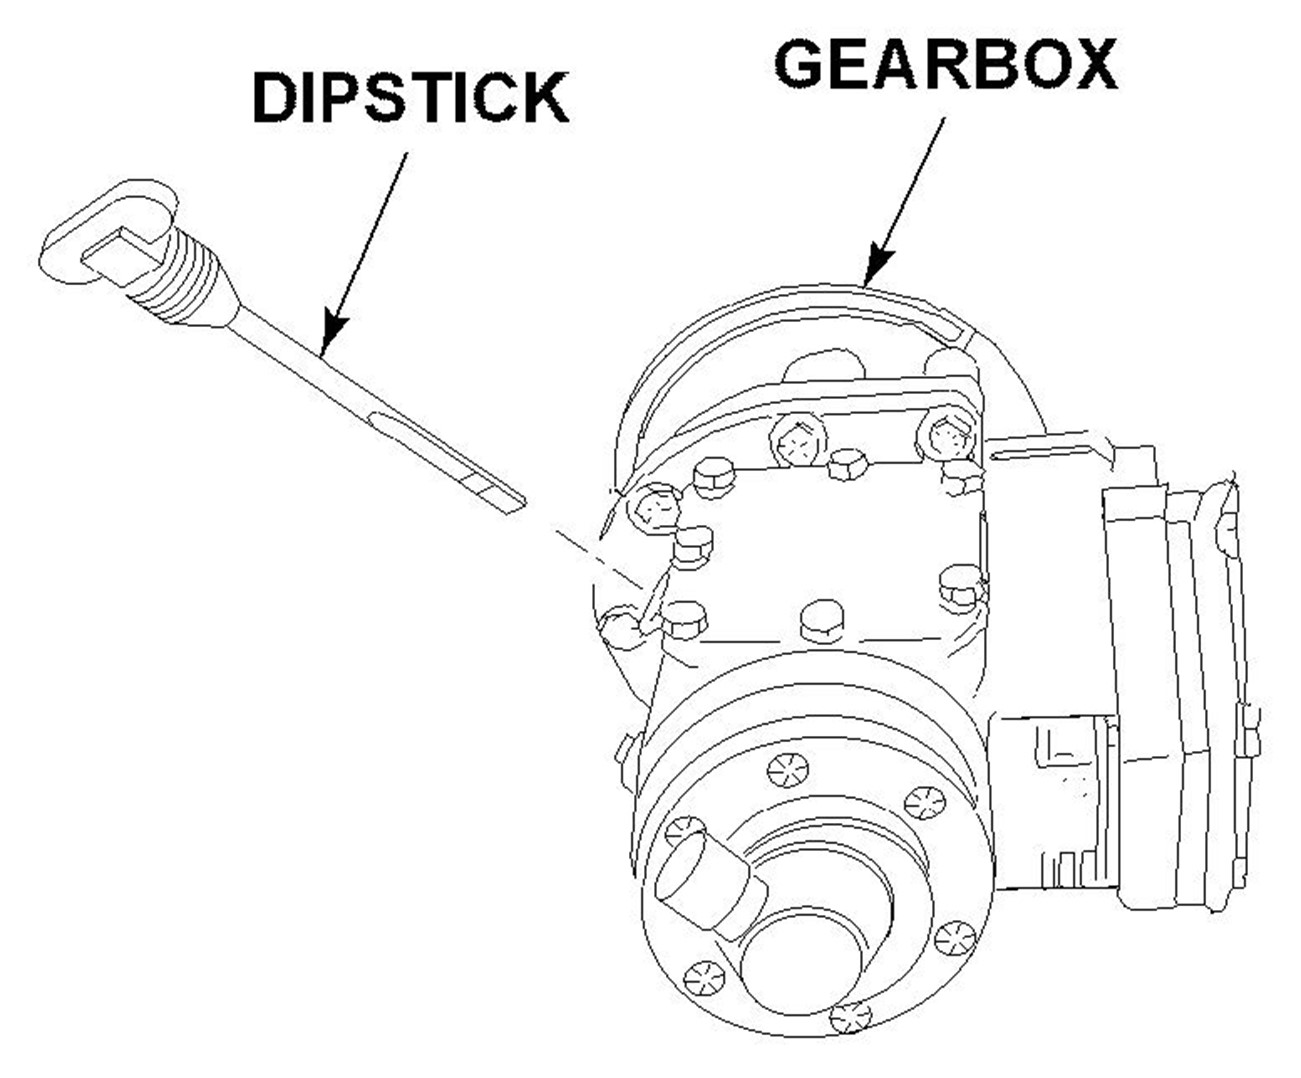 Right angle fan drive gearbox and dipstick